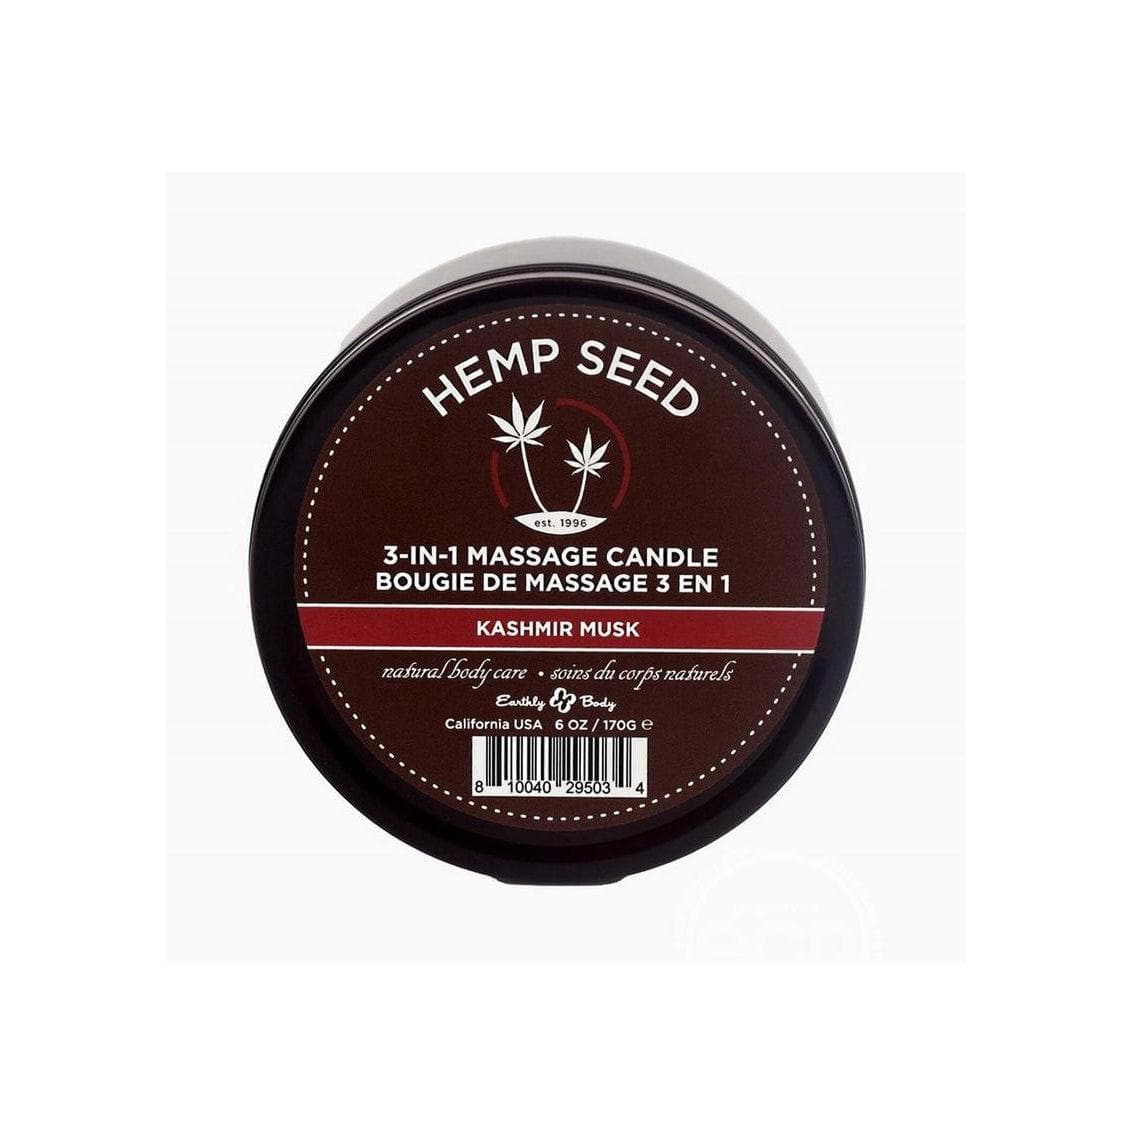 Earthly Body Hemp Seed 3 In 1 Massage Candle Kashmir Musk 6 oz - Romantic Blessings